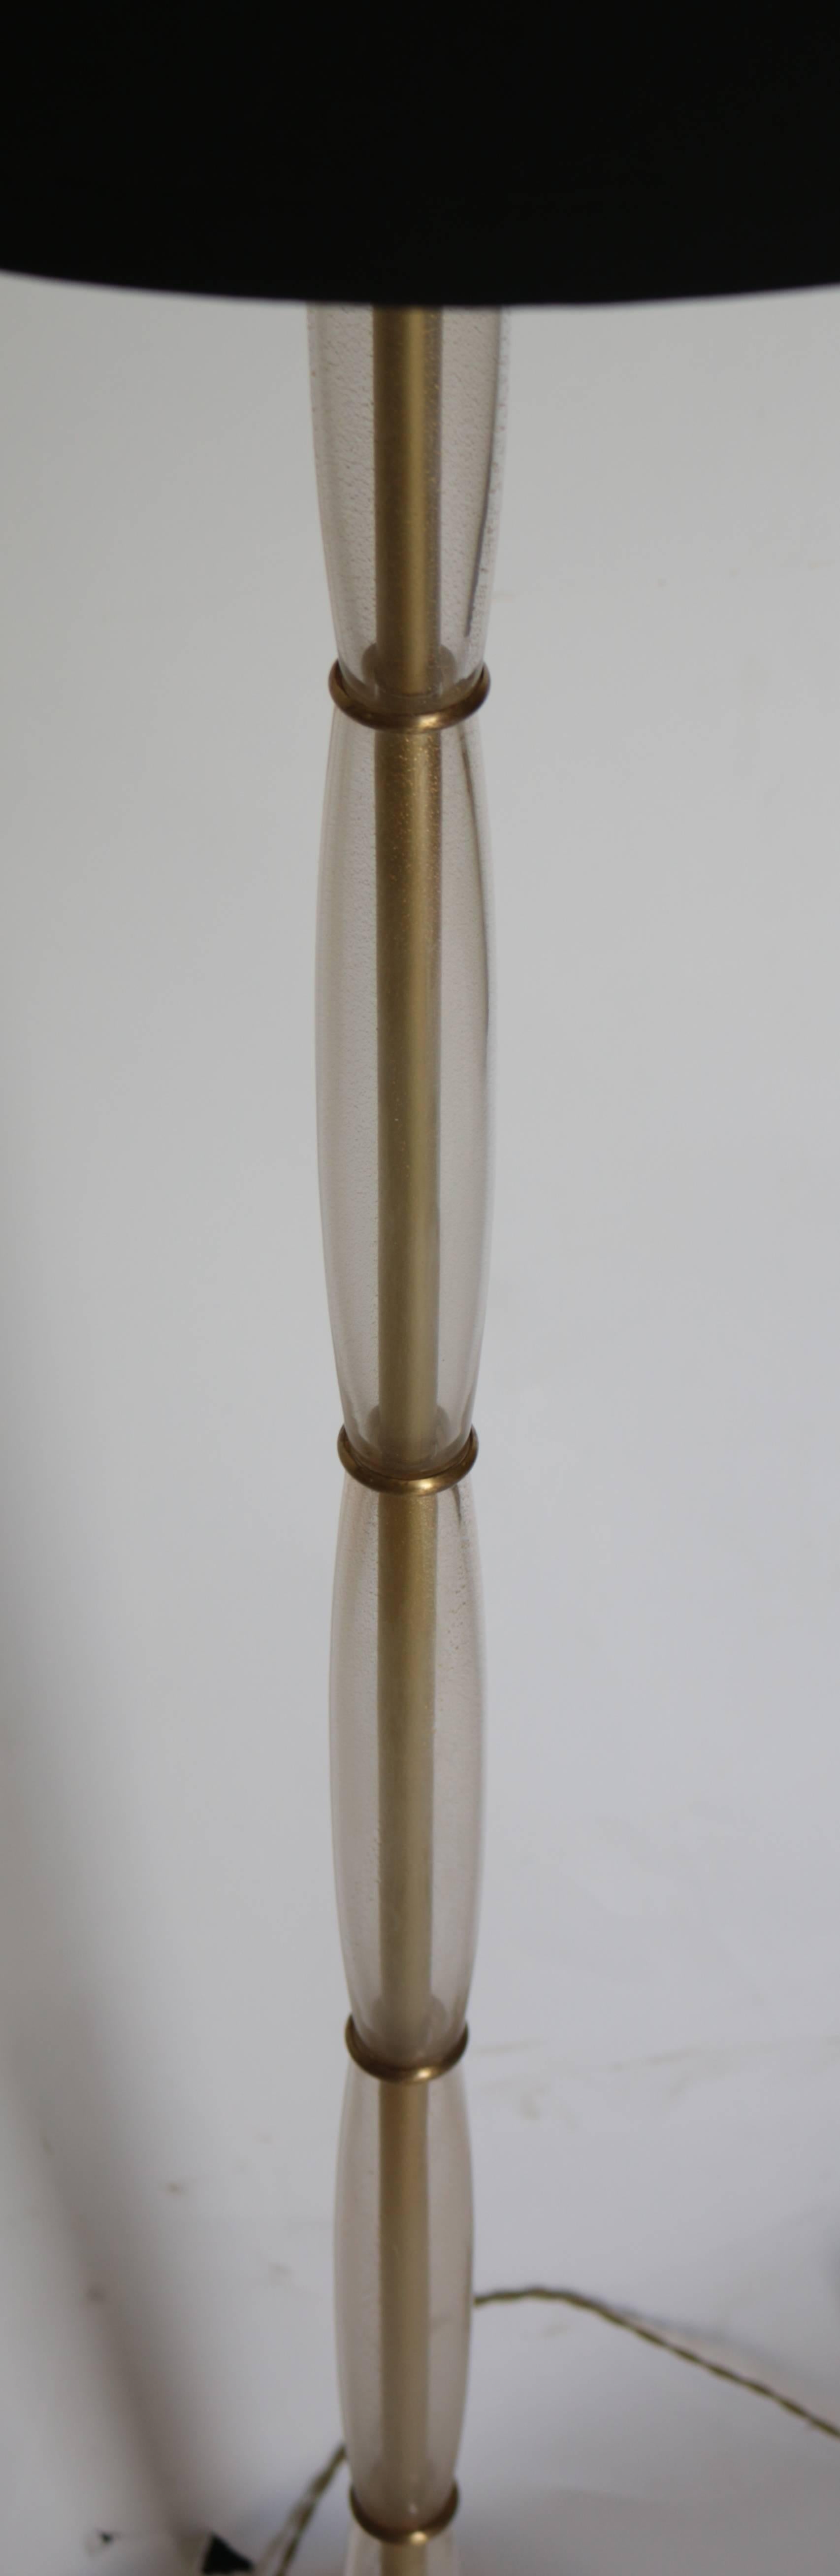 A beautiful modern Murano glass floor lamp by Donghia called the gigantic lamp in champagne with gold clusters. This piece is in excellent working condition and comes with a black linen shade that compliments the champagne beautifully. Decorated